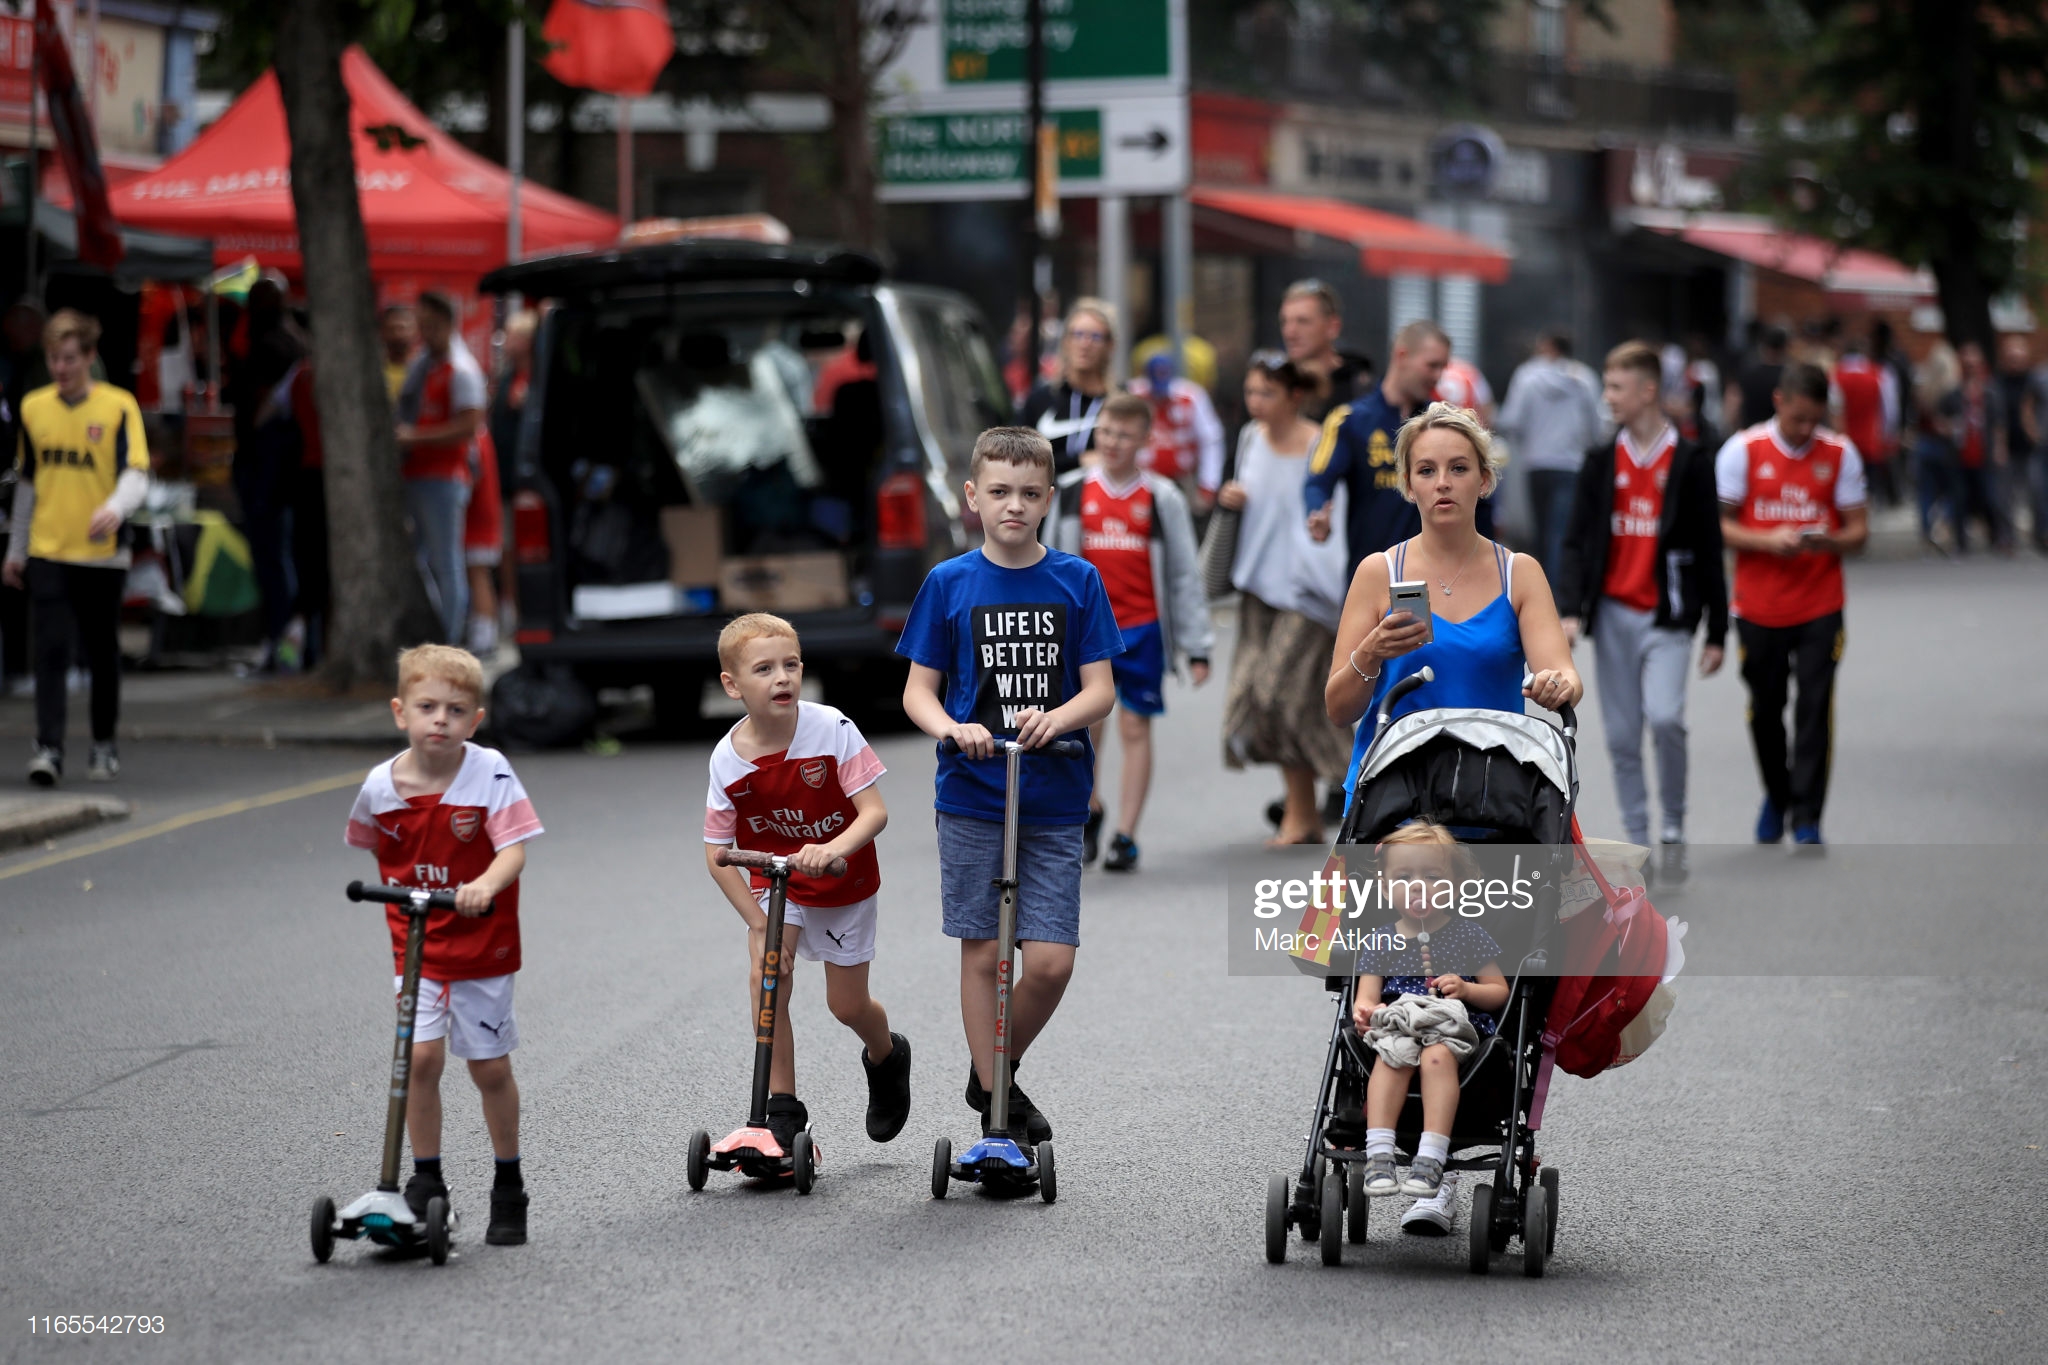 gettyimages-1165542793-2048x2048.jpg